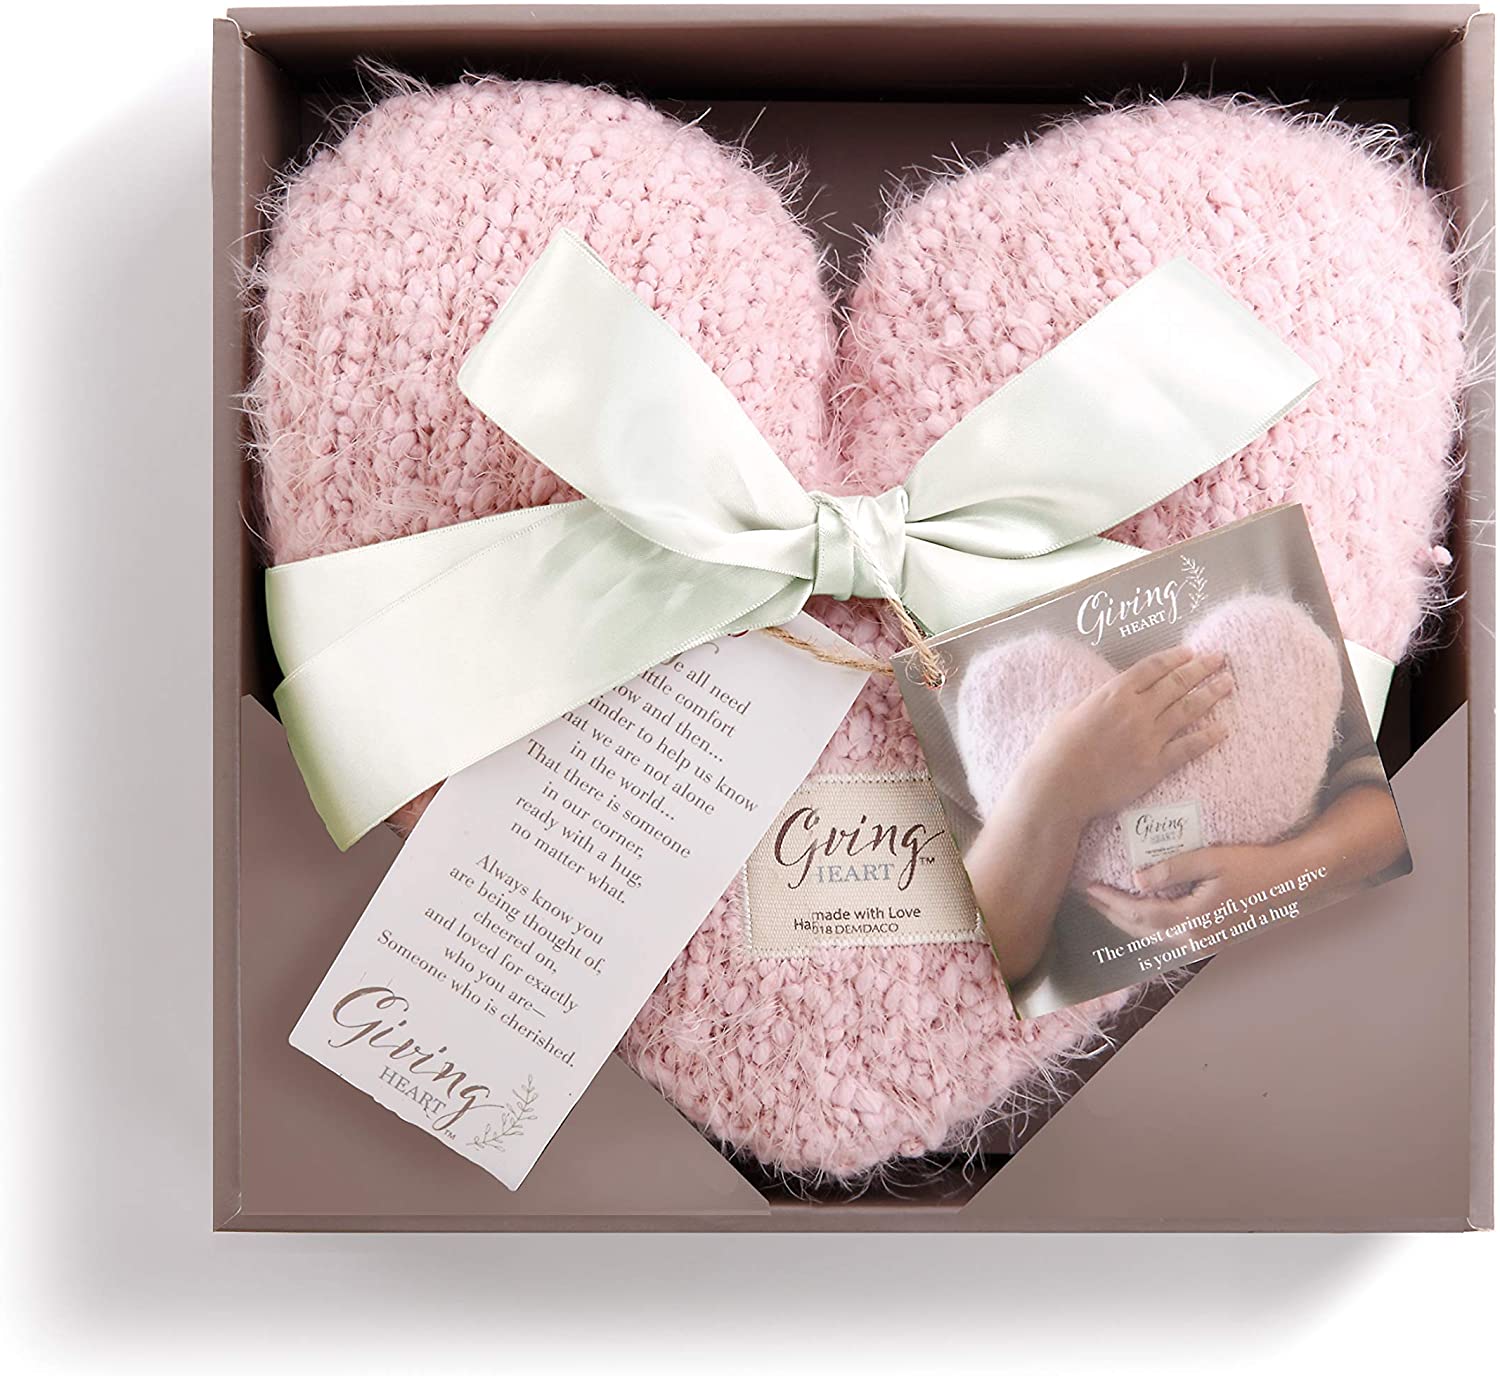 valentines-day-gifts-for-her-heart-cushion